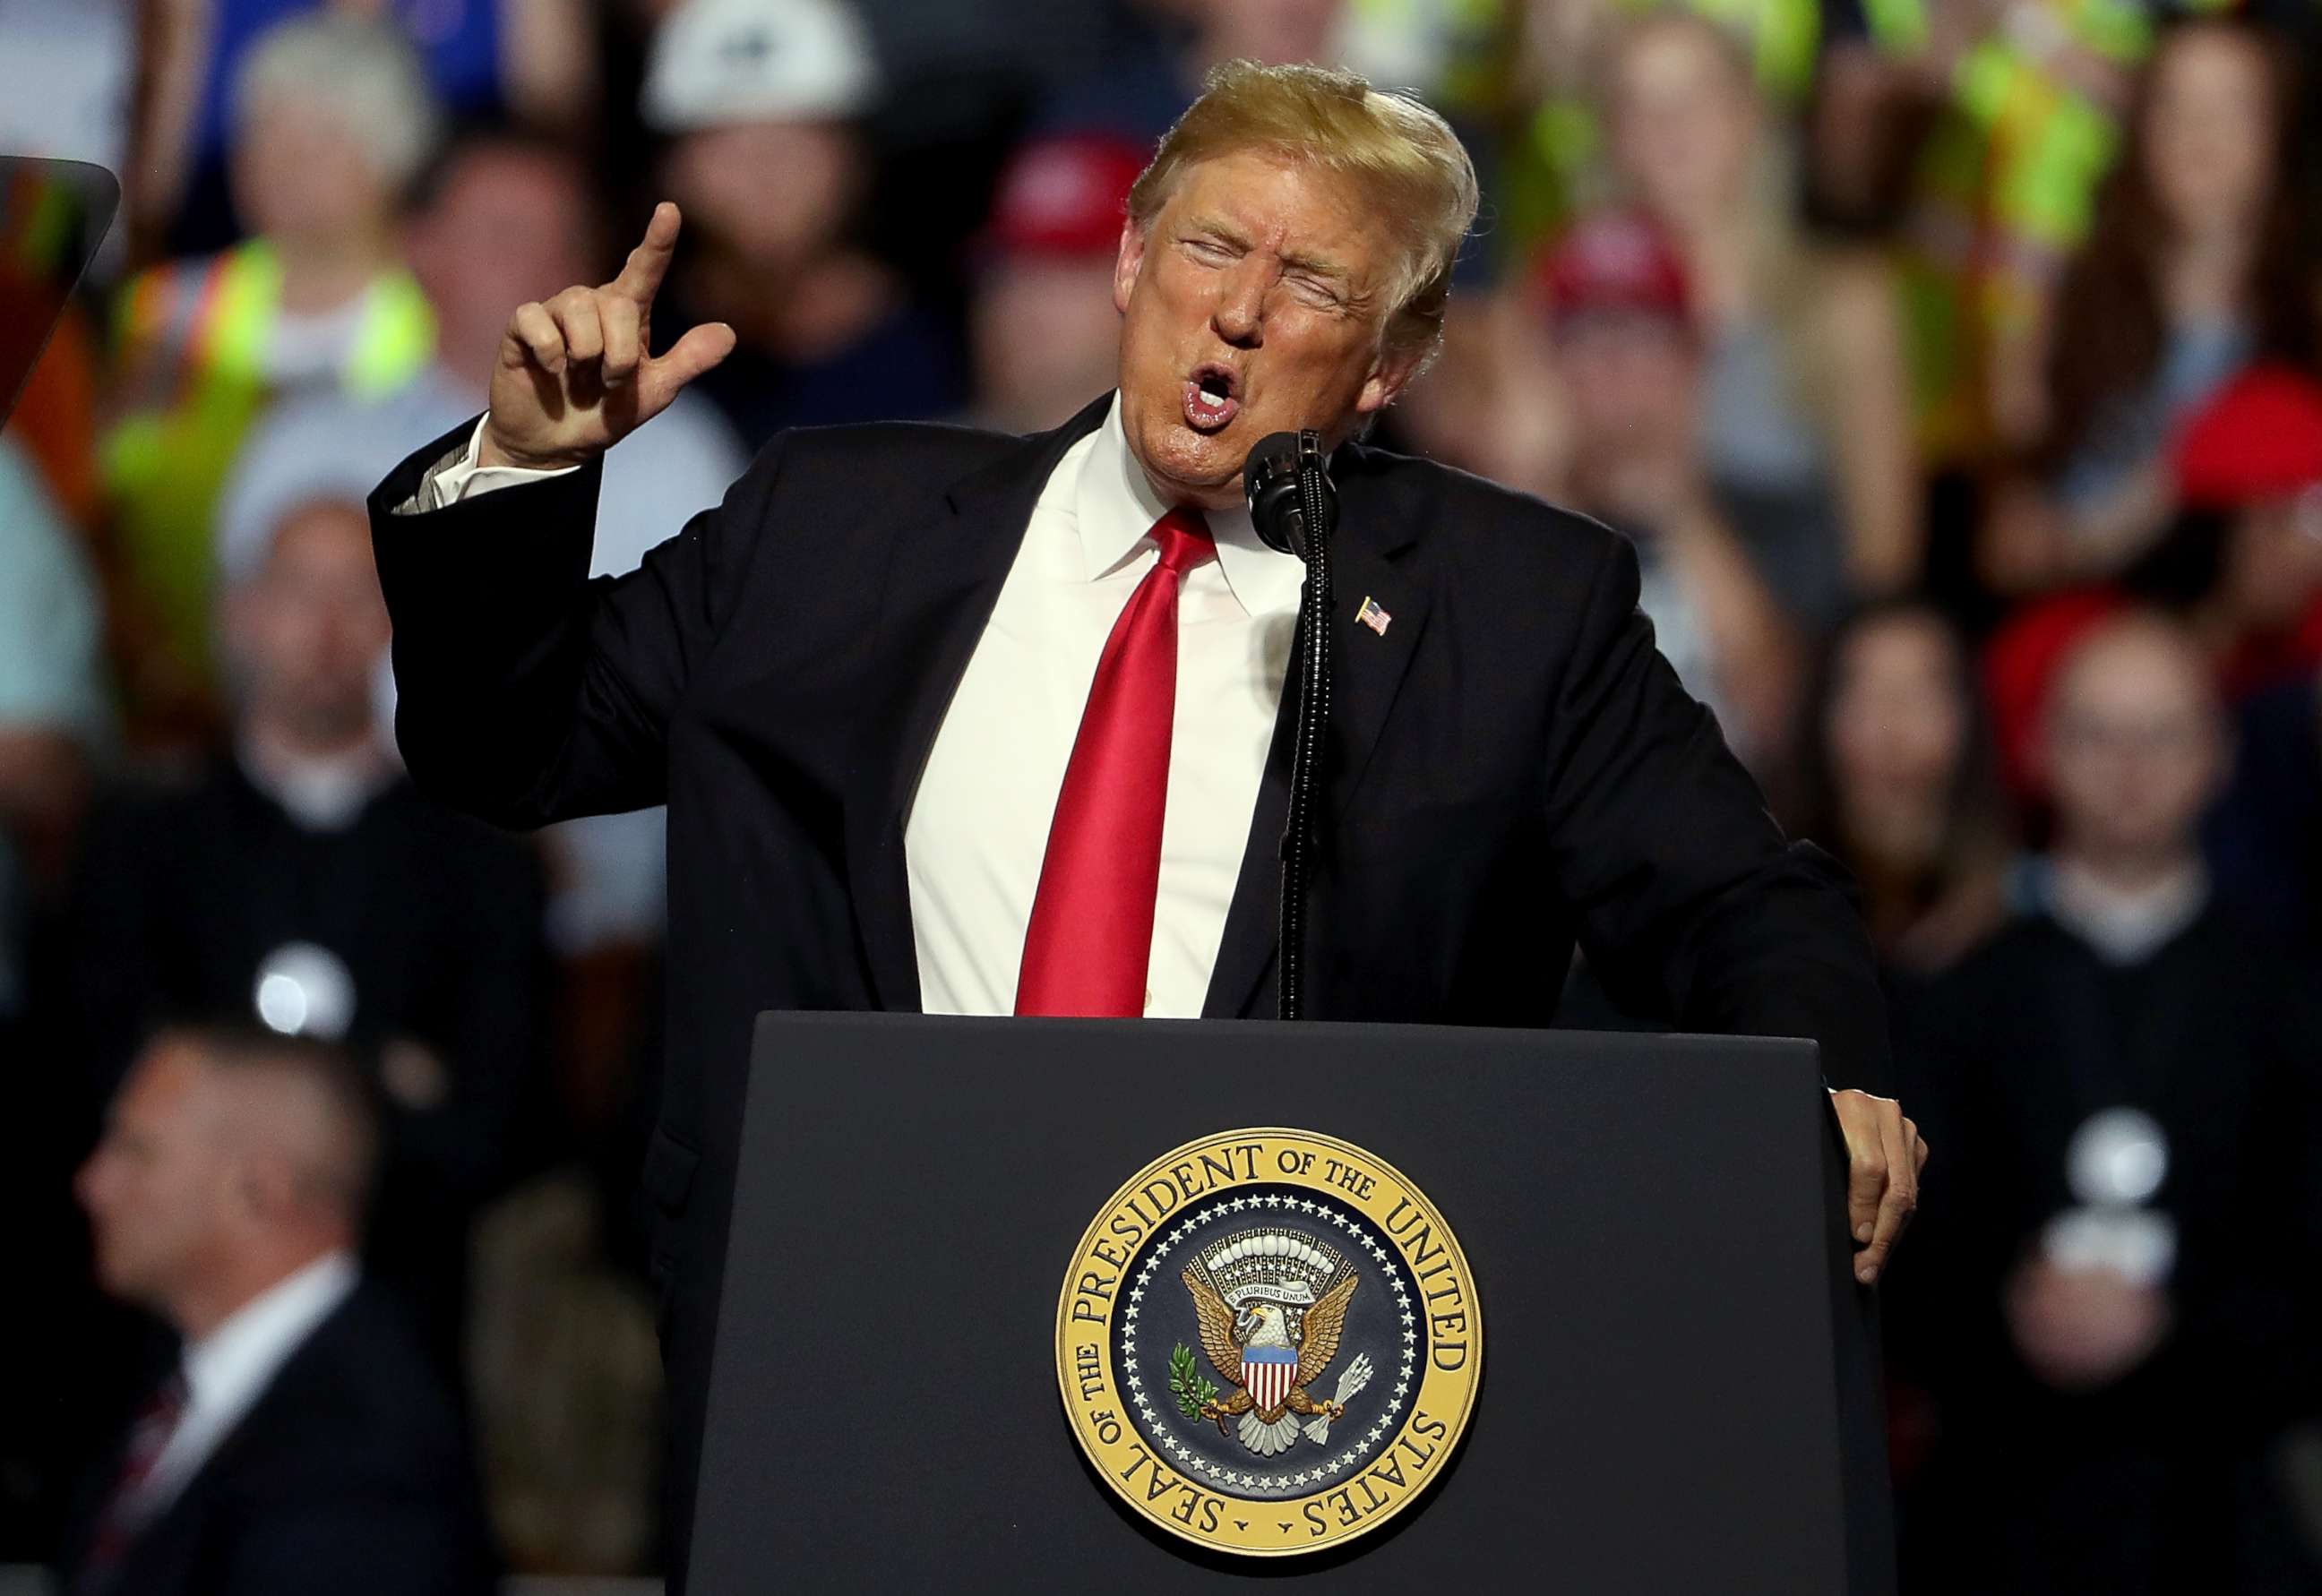 PHOTO: President Donald Trump speaks during a campaign rally at Four Seasons Arena on July 5, 2018 in Great Falls, Mont.